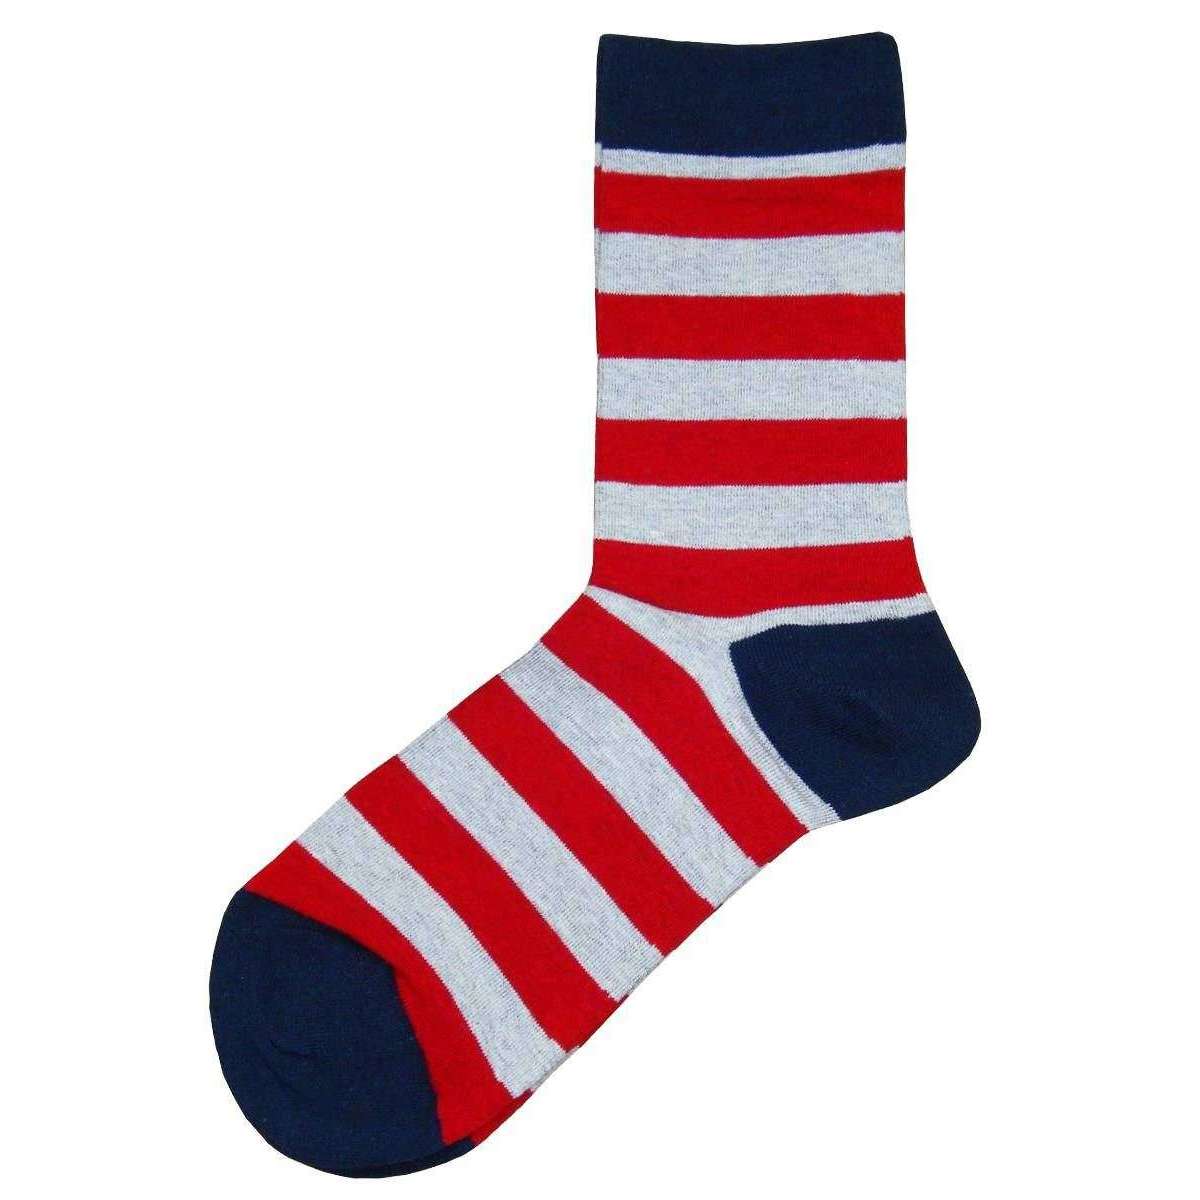 Bassin and Brown Hooped Stripe Socks - Red/White/Navy